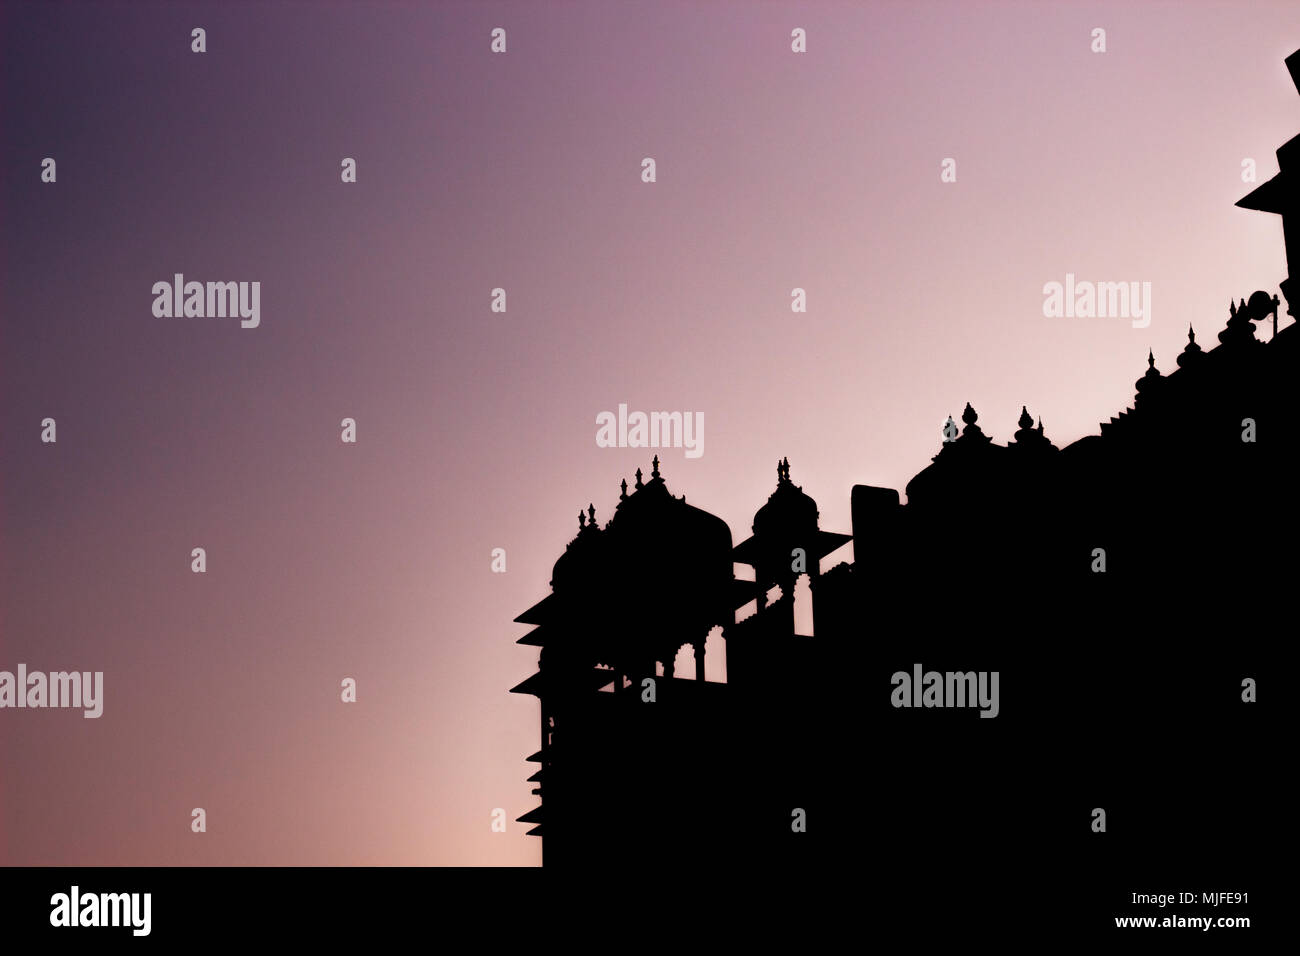 City Palace Udaipur Rajasthan Photo Silhouette Banque D'Images